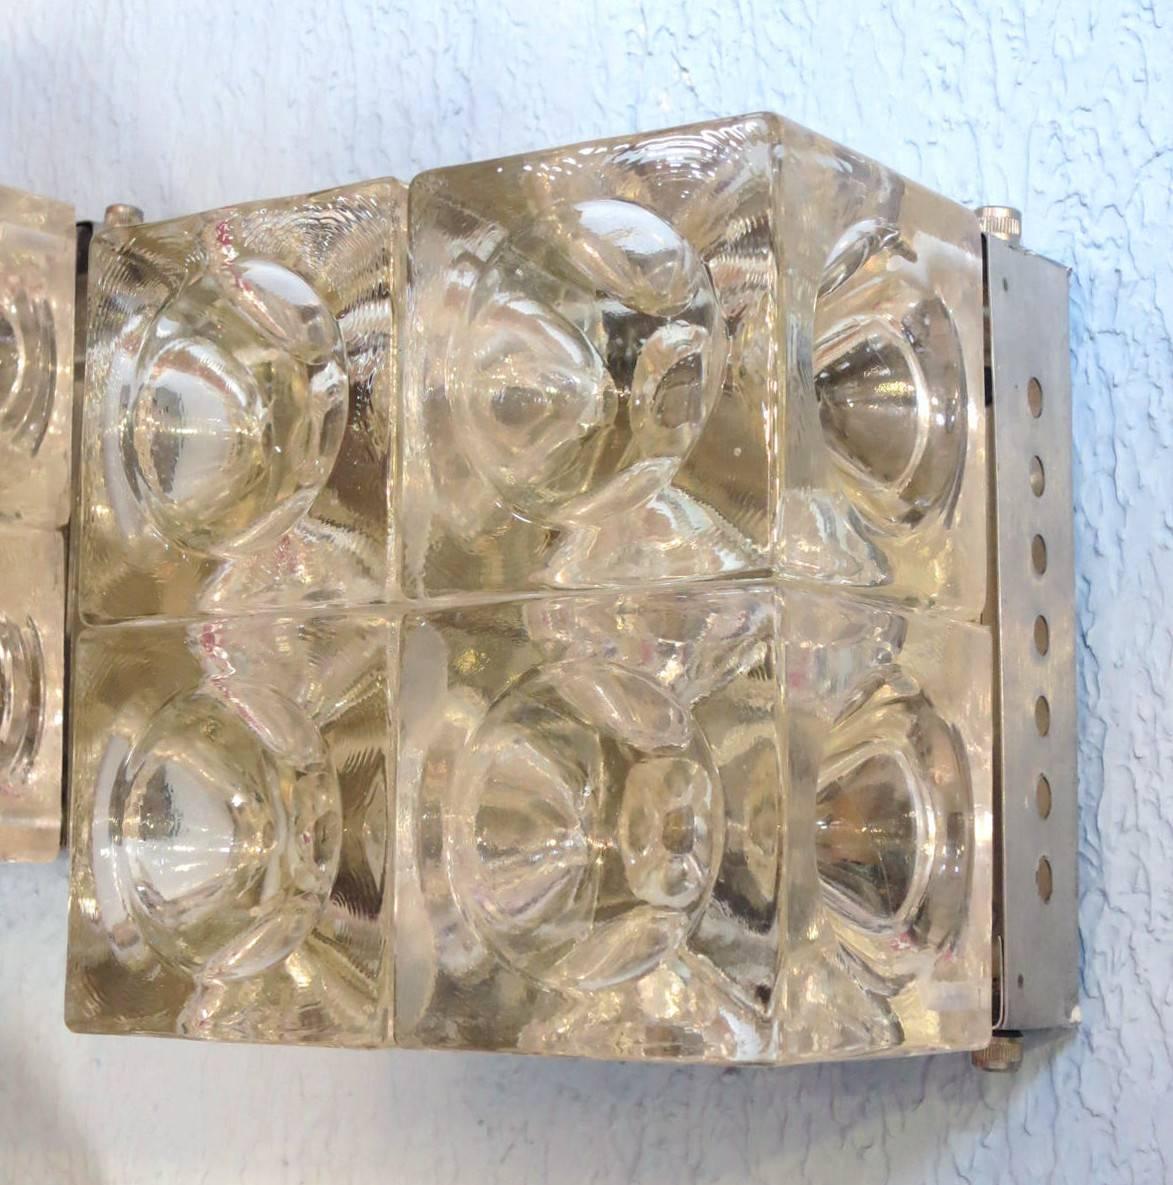 Vintage Italian wall lights or flush mounts with clear Murano glass cubes with indented pattern mounted on nickel back plates / Designed by Poliarte, circa 1960s / Made in Italy
2 lights / E12 or E14 type / max 40W each
Height: 6.5 inches / Width: